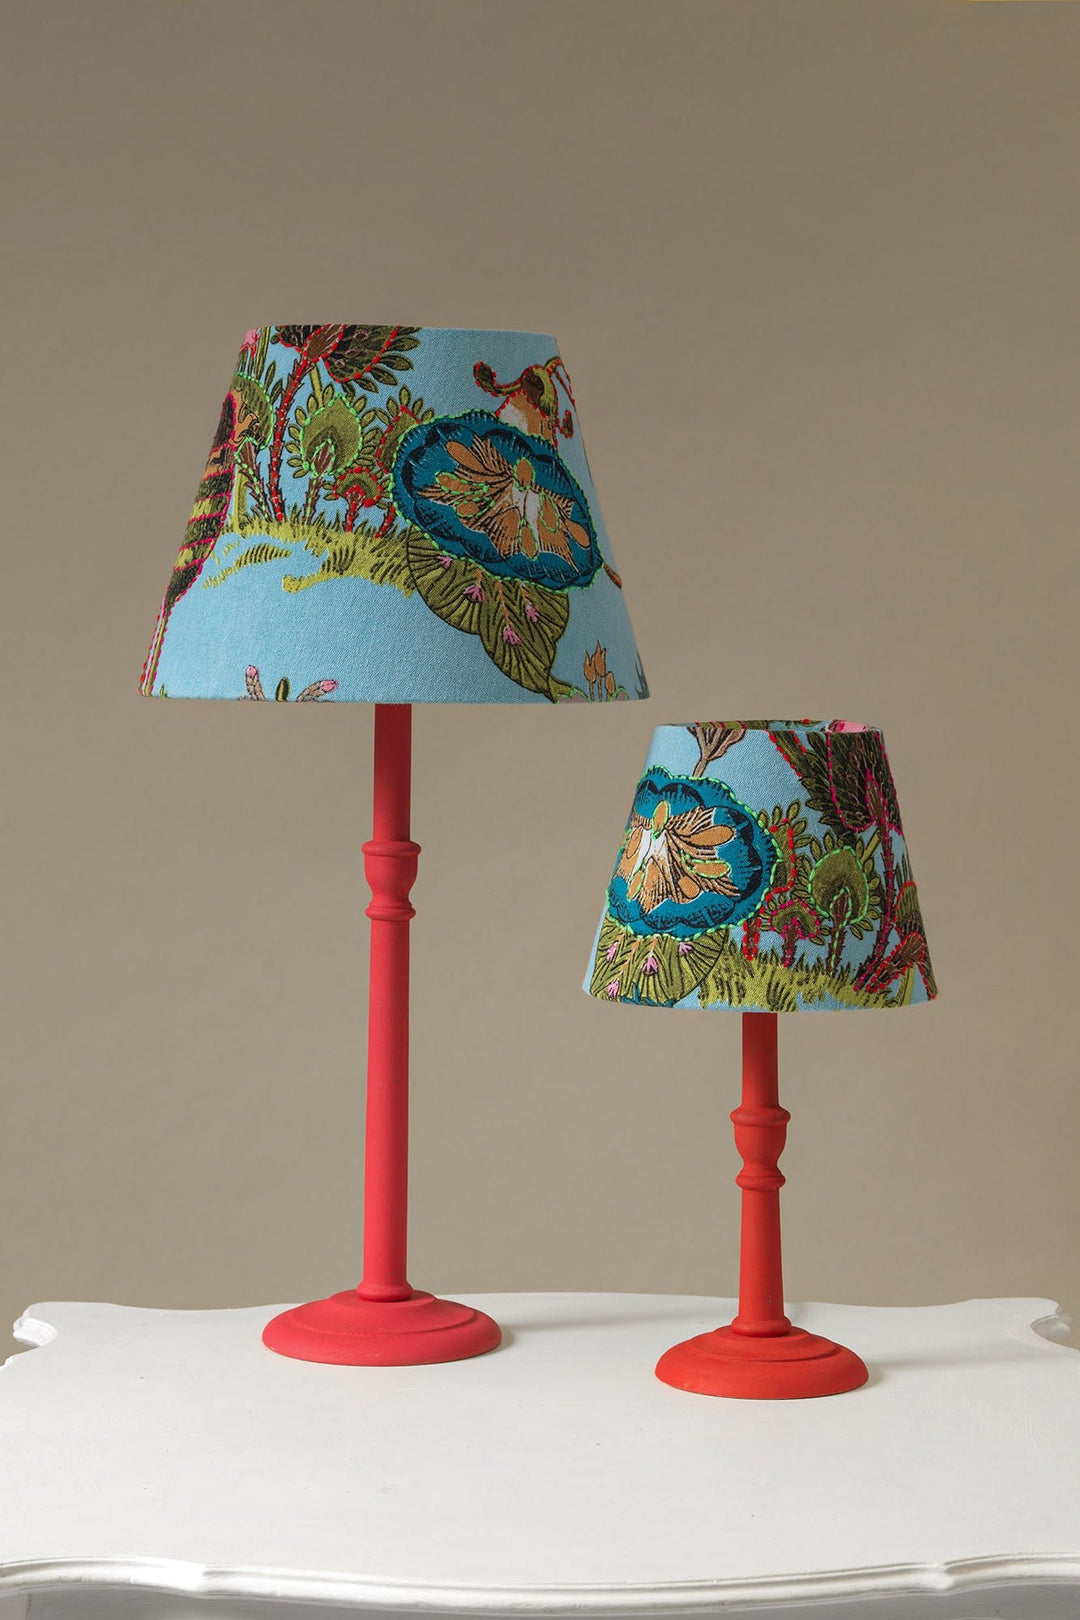 Eccentric Blooms Sky 12" Tapered Lampshade - One Hundred Stars